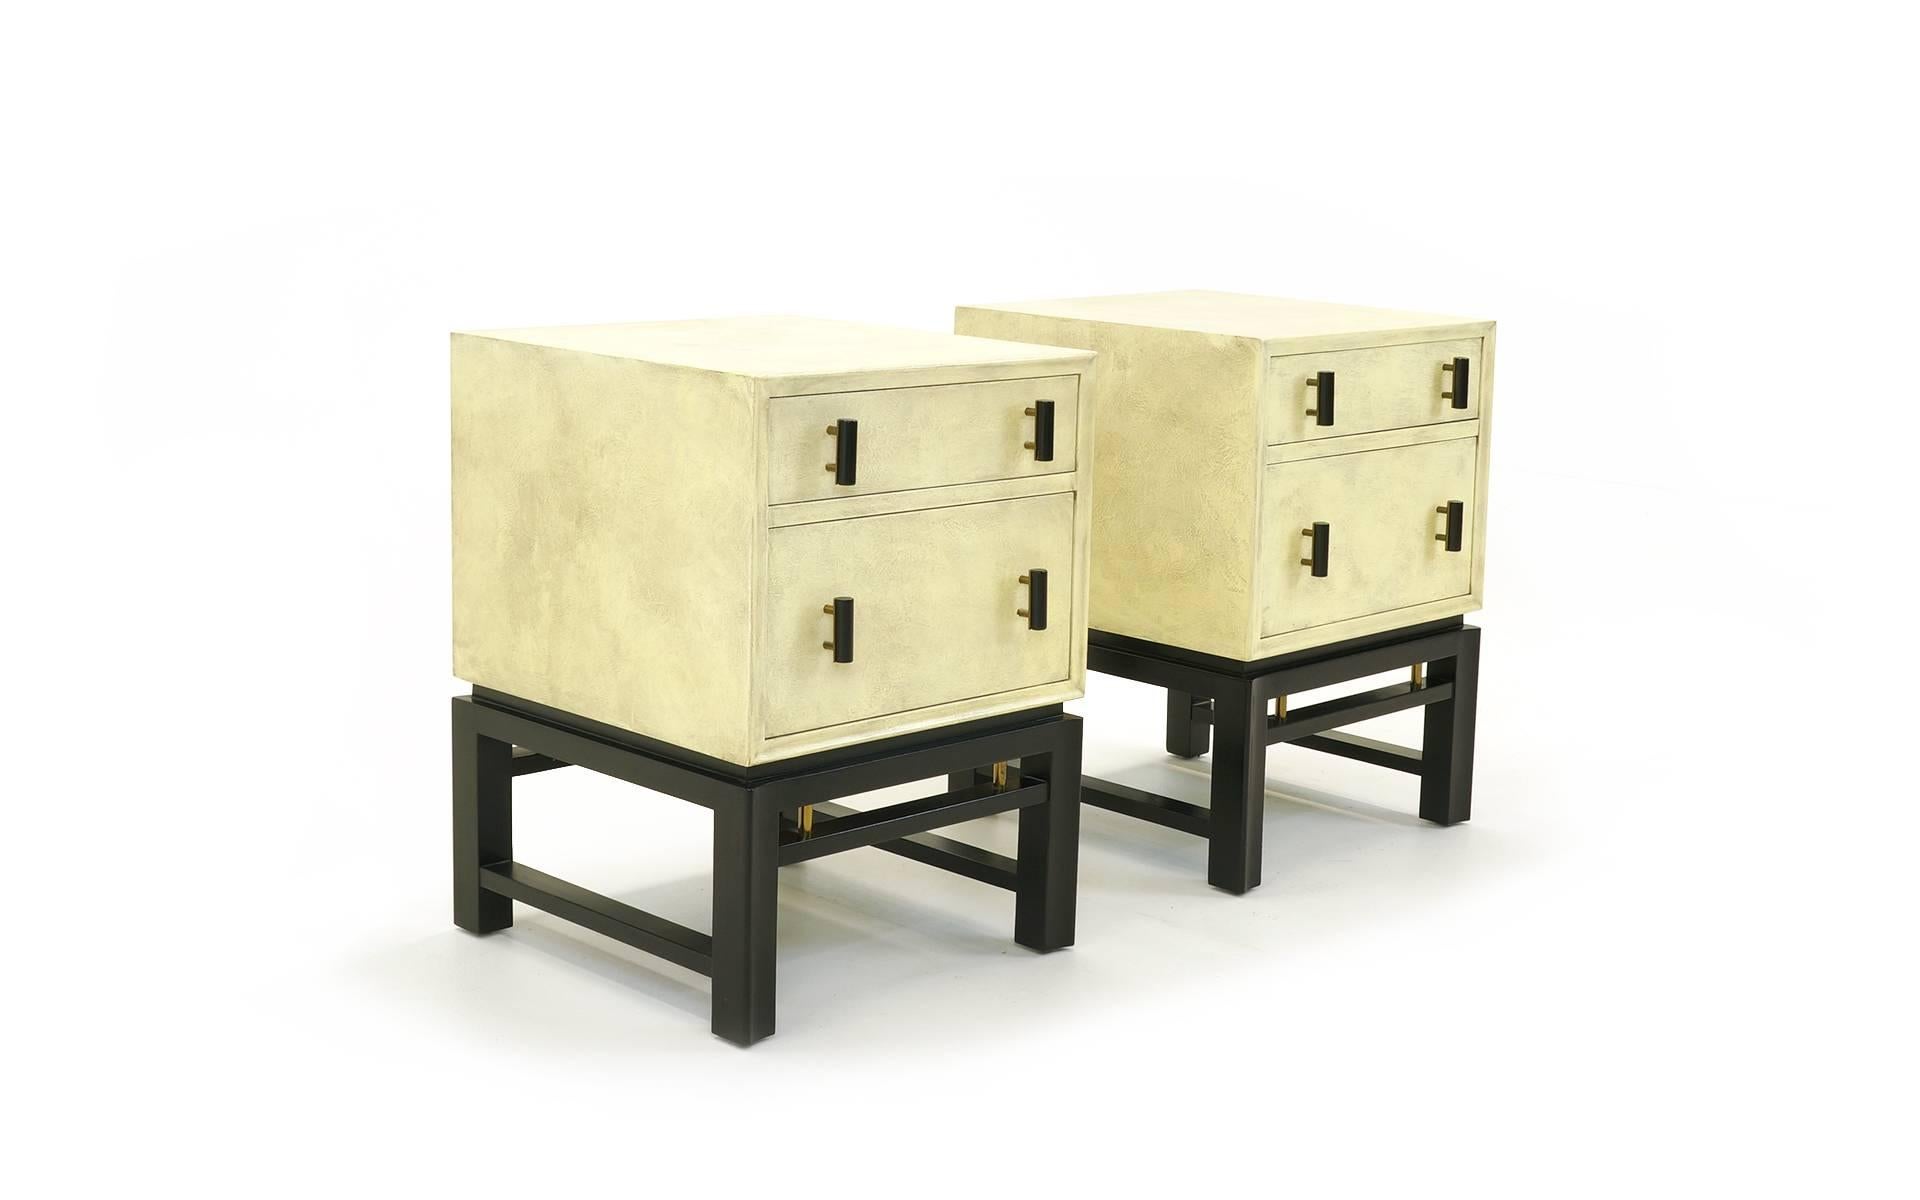 Mid-Century Modern Pair of Nightstands Designed by Edward Wormley for Dunbar